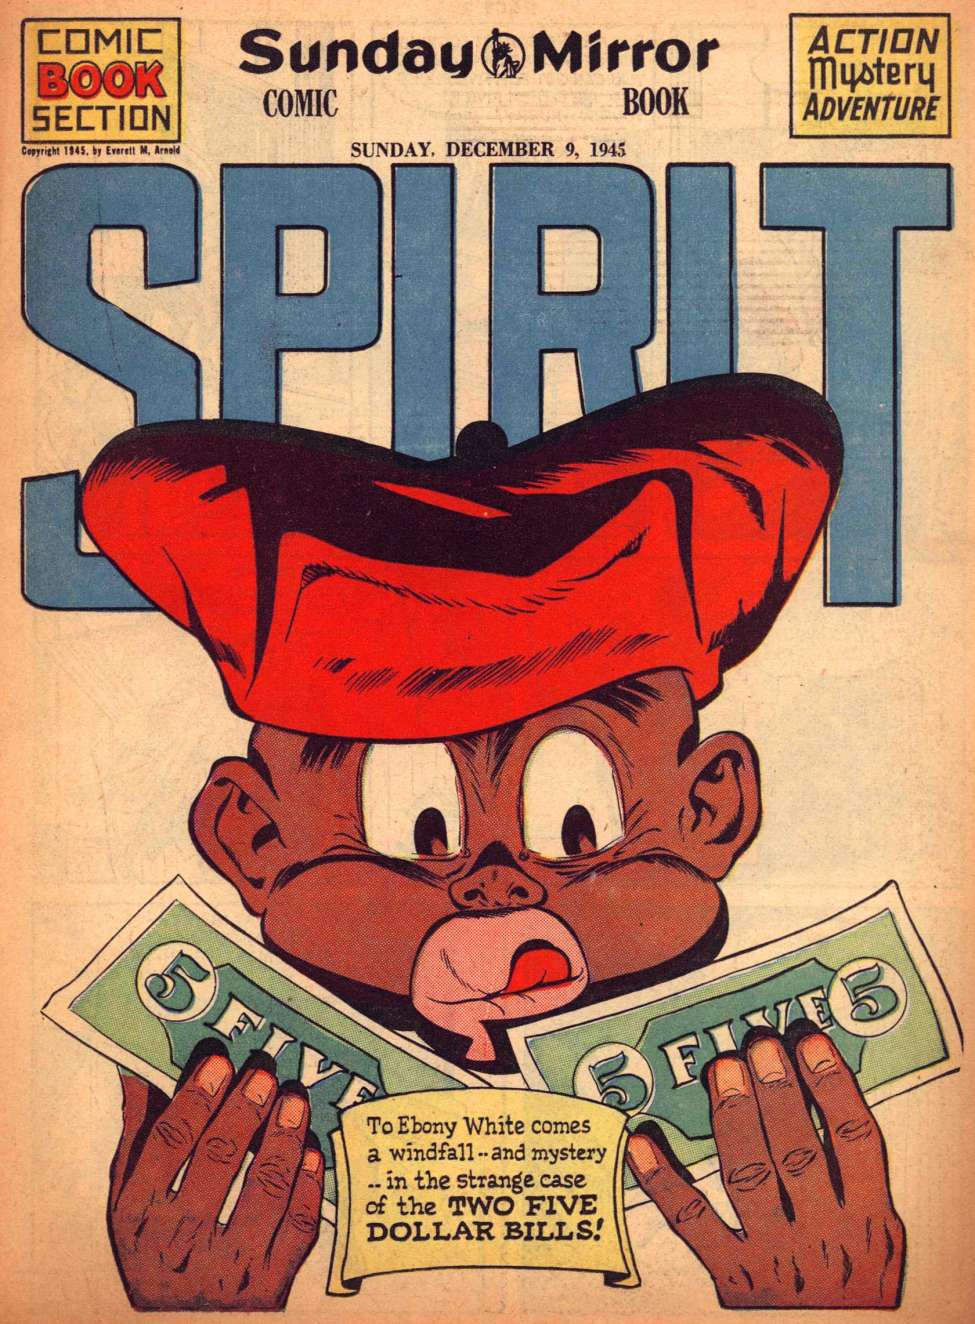 Comic Book Cover For The Spirit (1945-12-09) - Sunday Mirror - Version 2